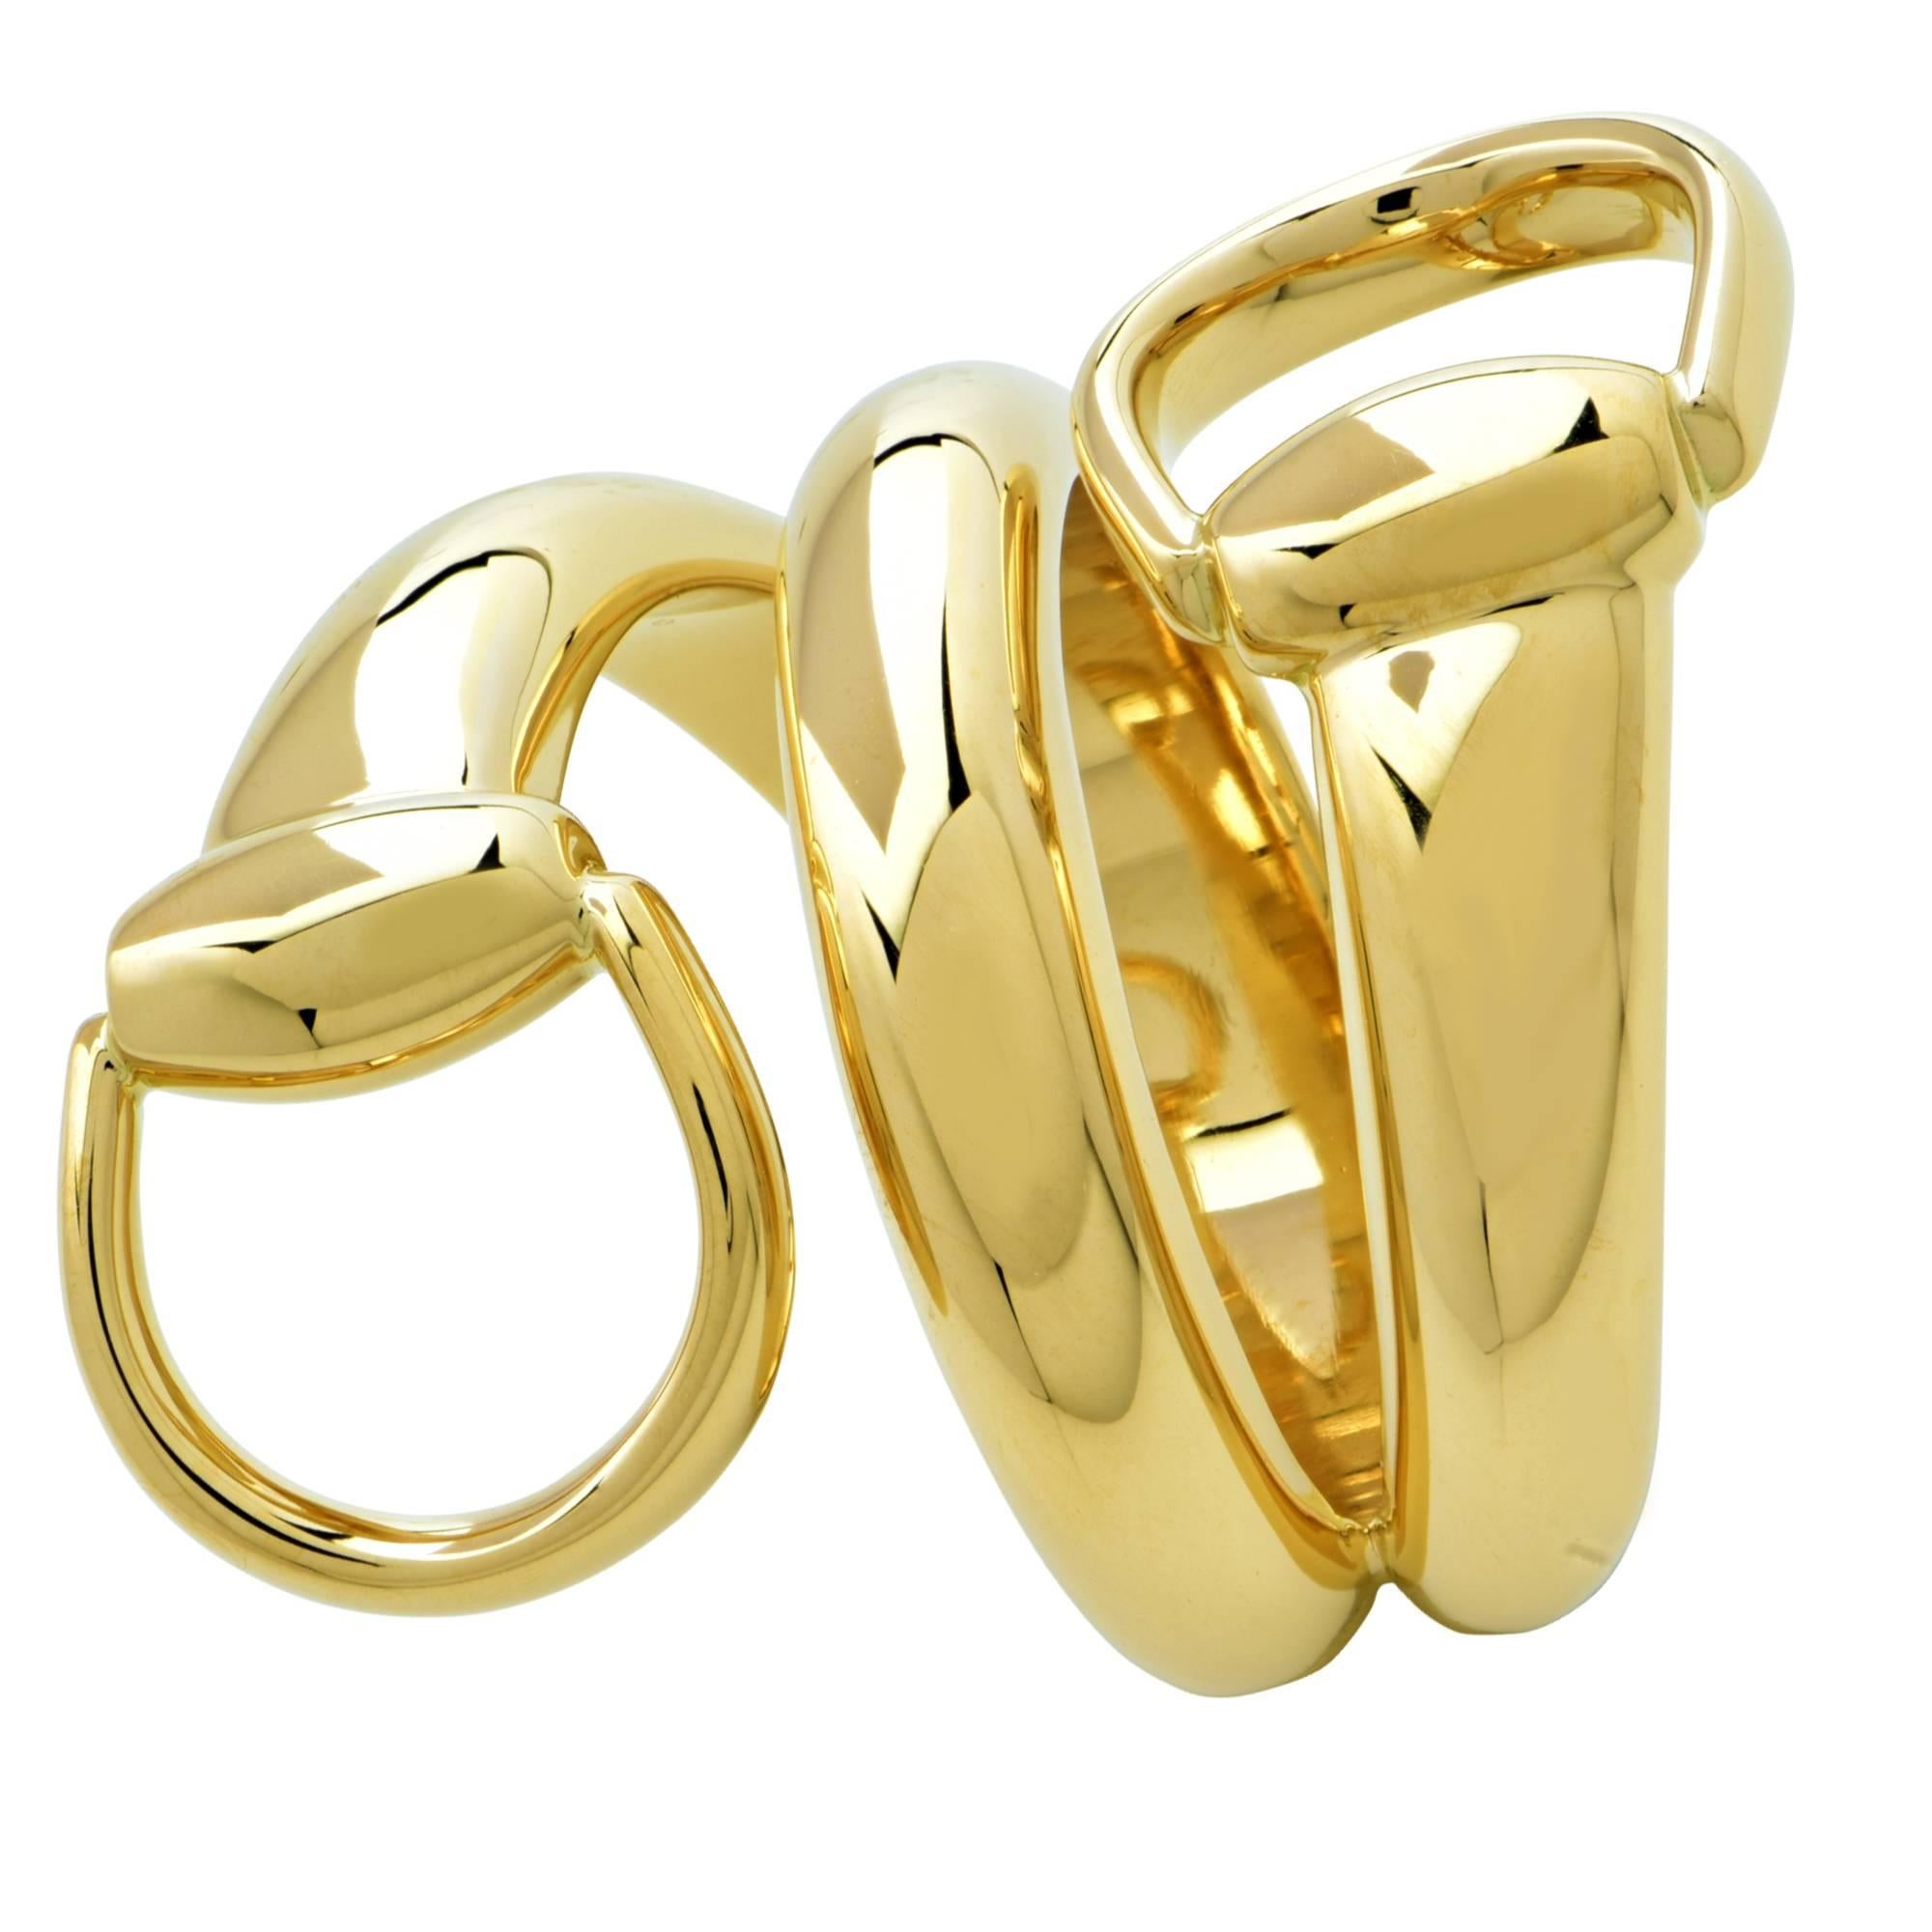 Gorgeous Gucci Horsebit ring crafted in 18K yellow gold, measuring 1.2” and tapering to .25 of an inch. This signature equestrian style ring is a size 6.5. 

Our pieces are all accompanied by an appraisal performed by one of our in-house GIA